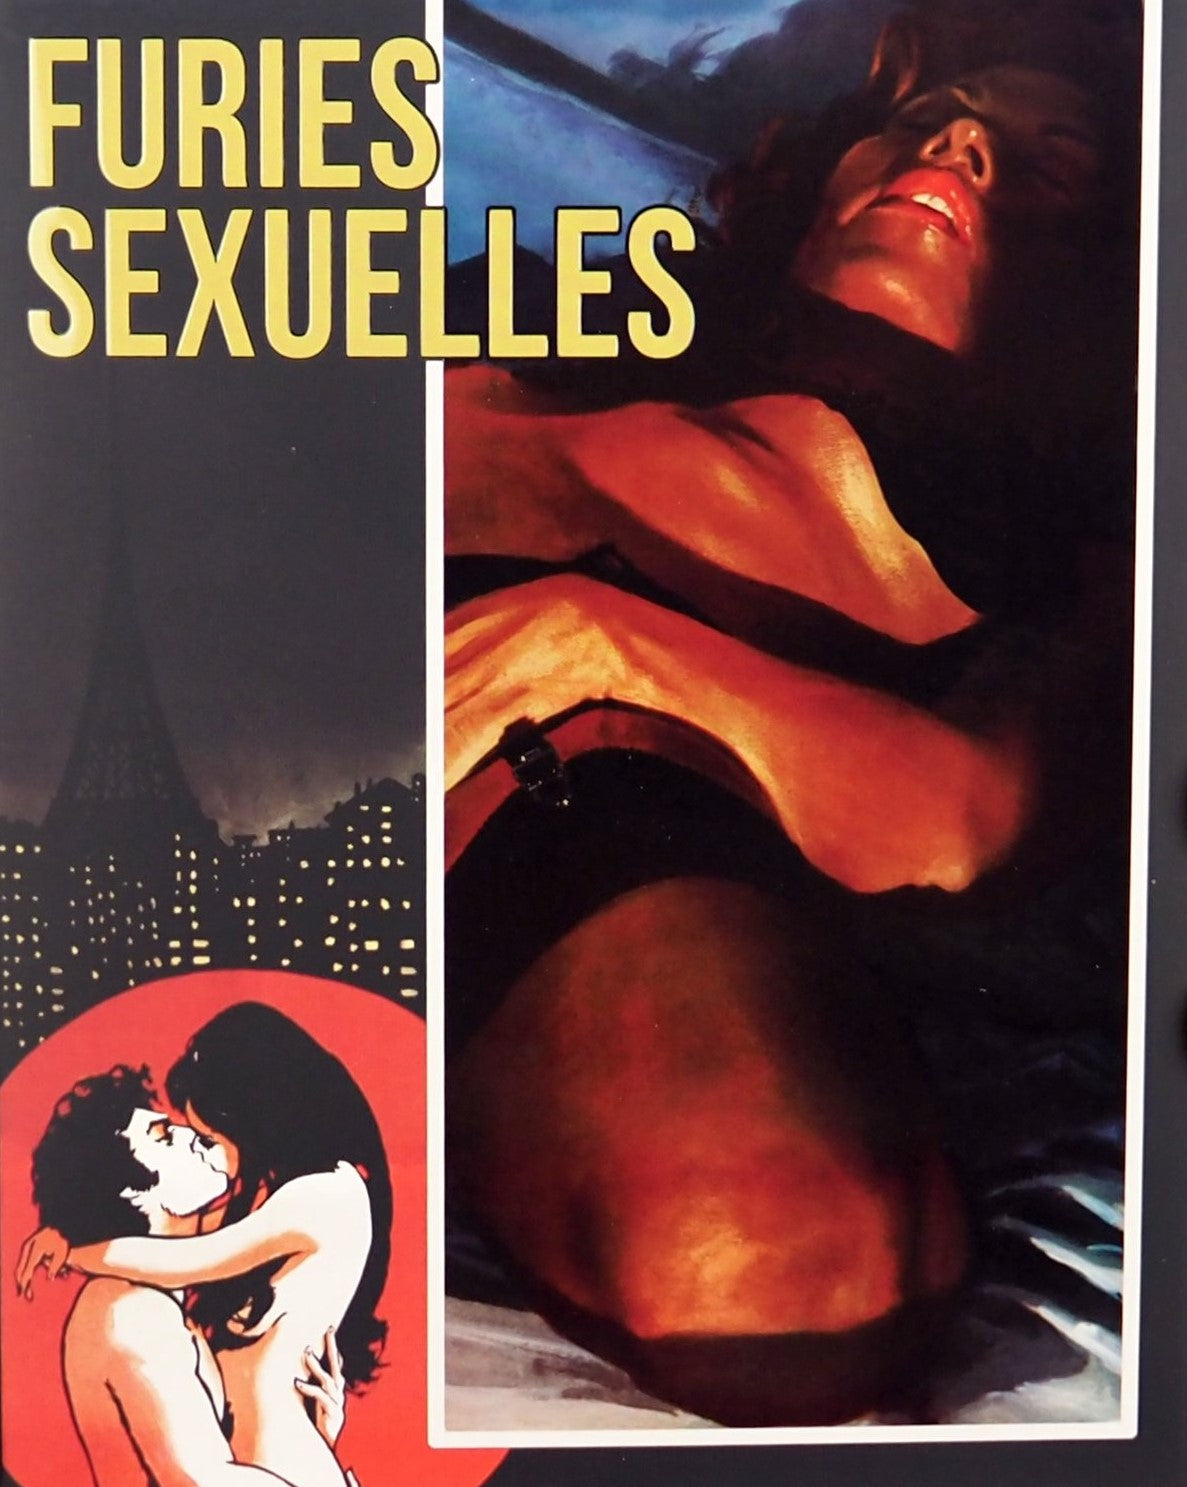 Furies Sexuelles / Prostitution Clandestine (Limited Edition) Blu-Ray Blu-Ray